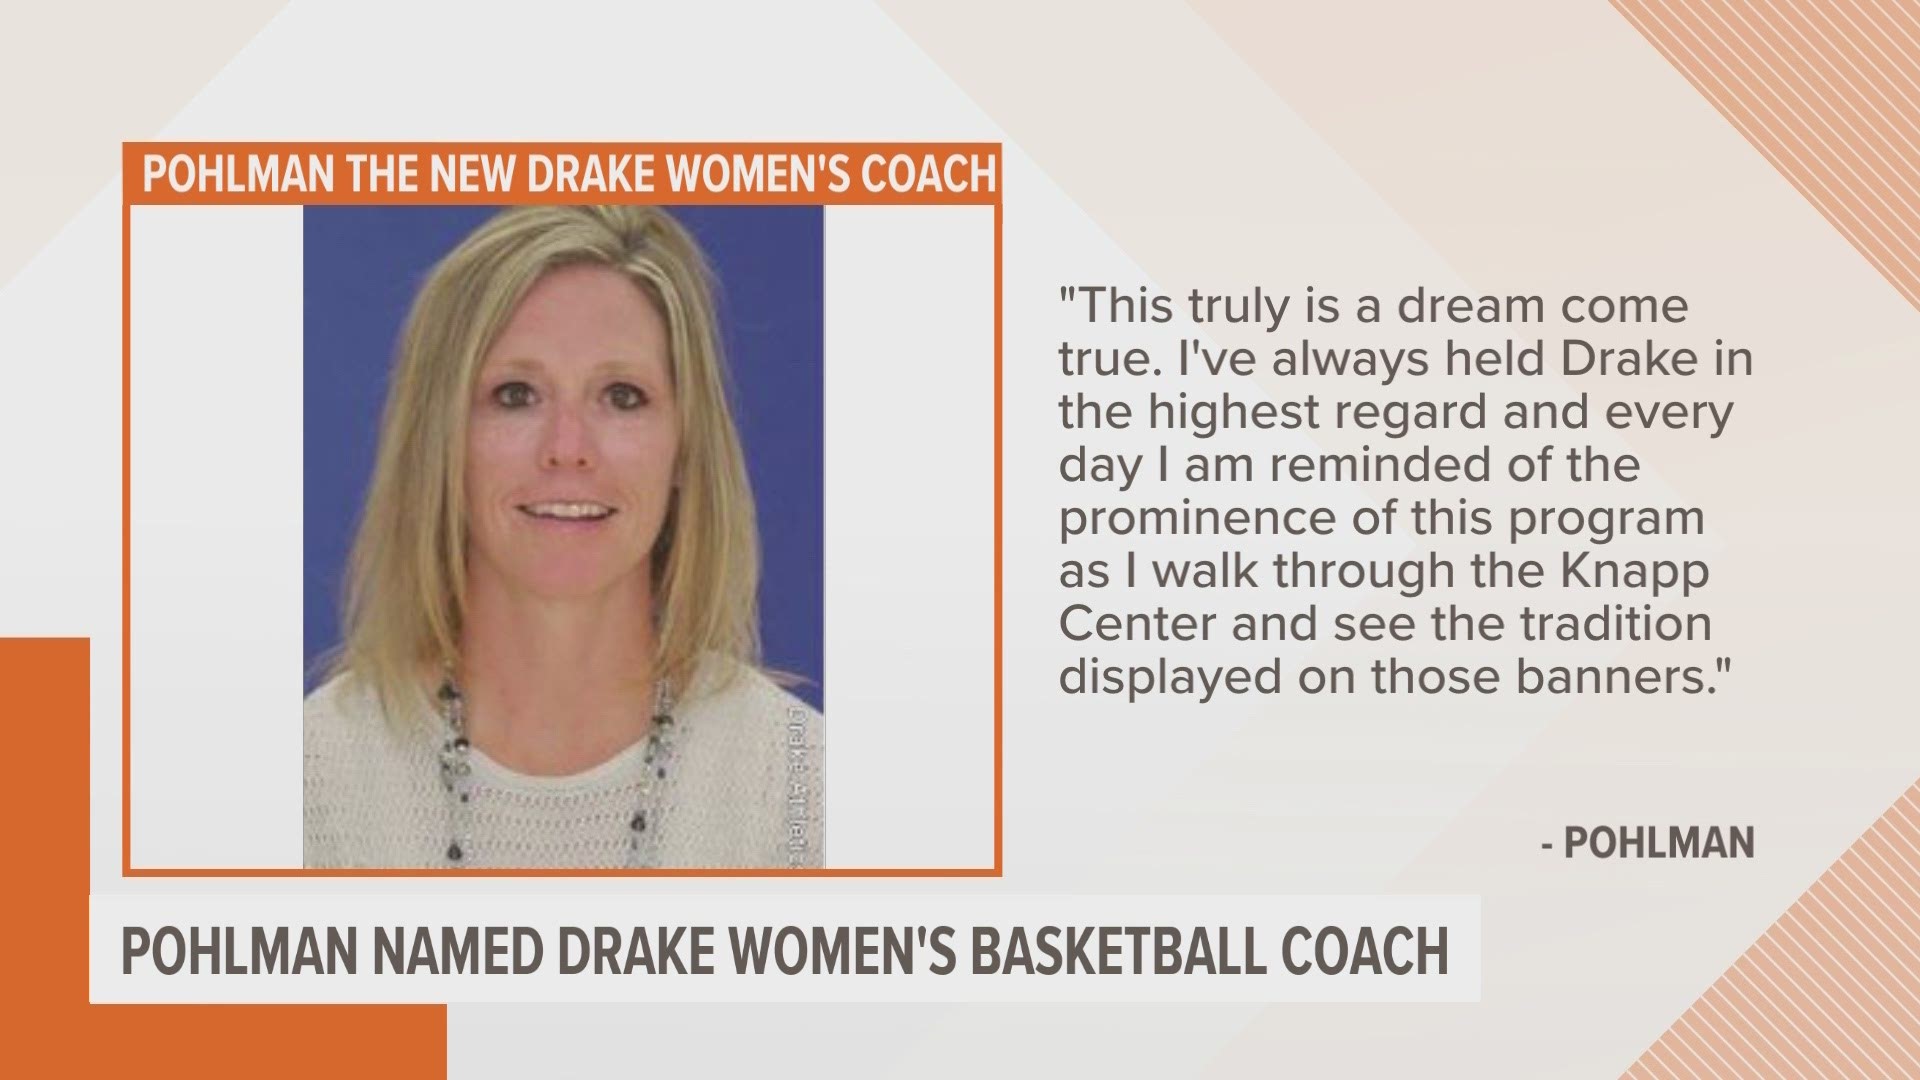 Pohlman has been with Drake University for 14 seasons.